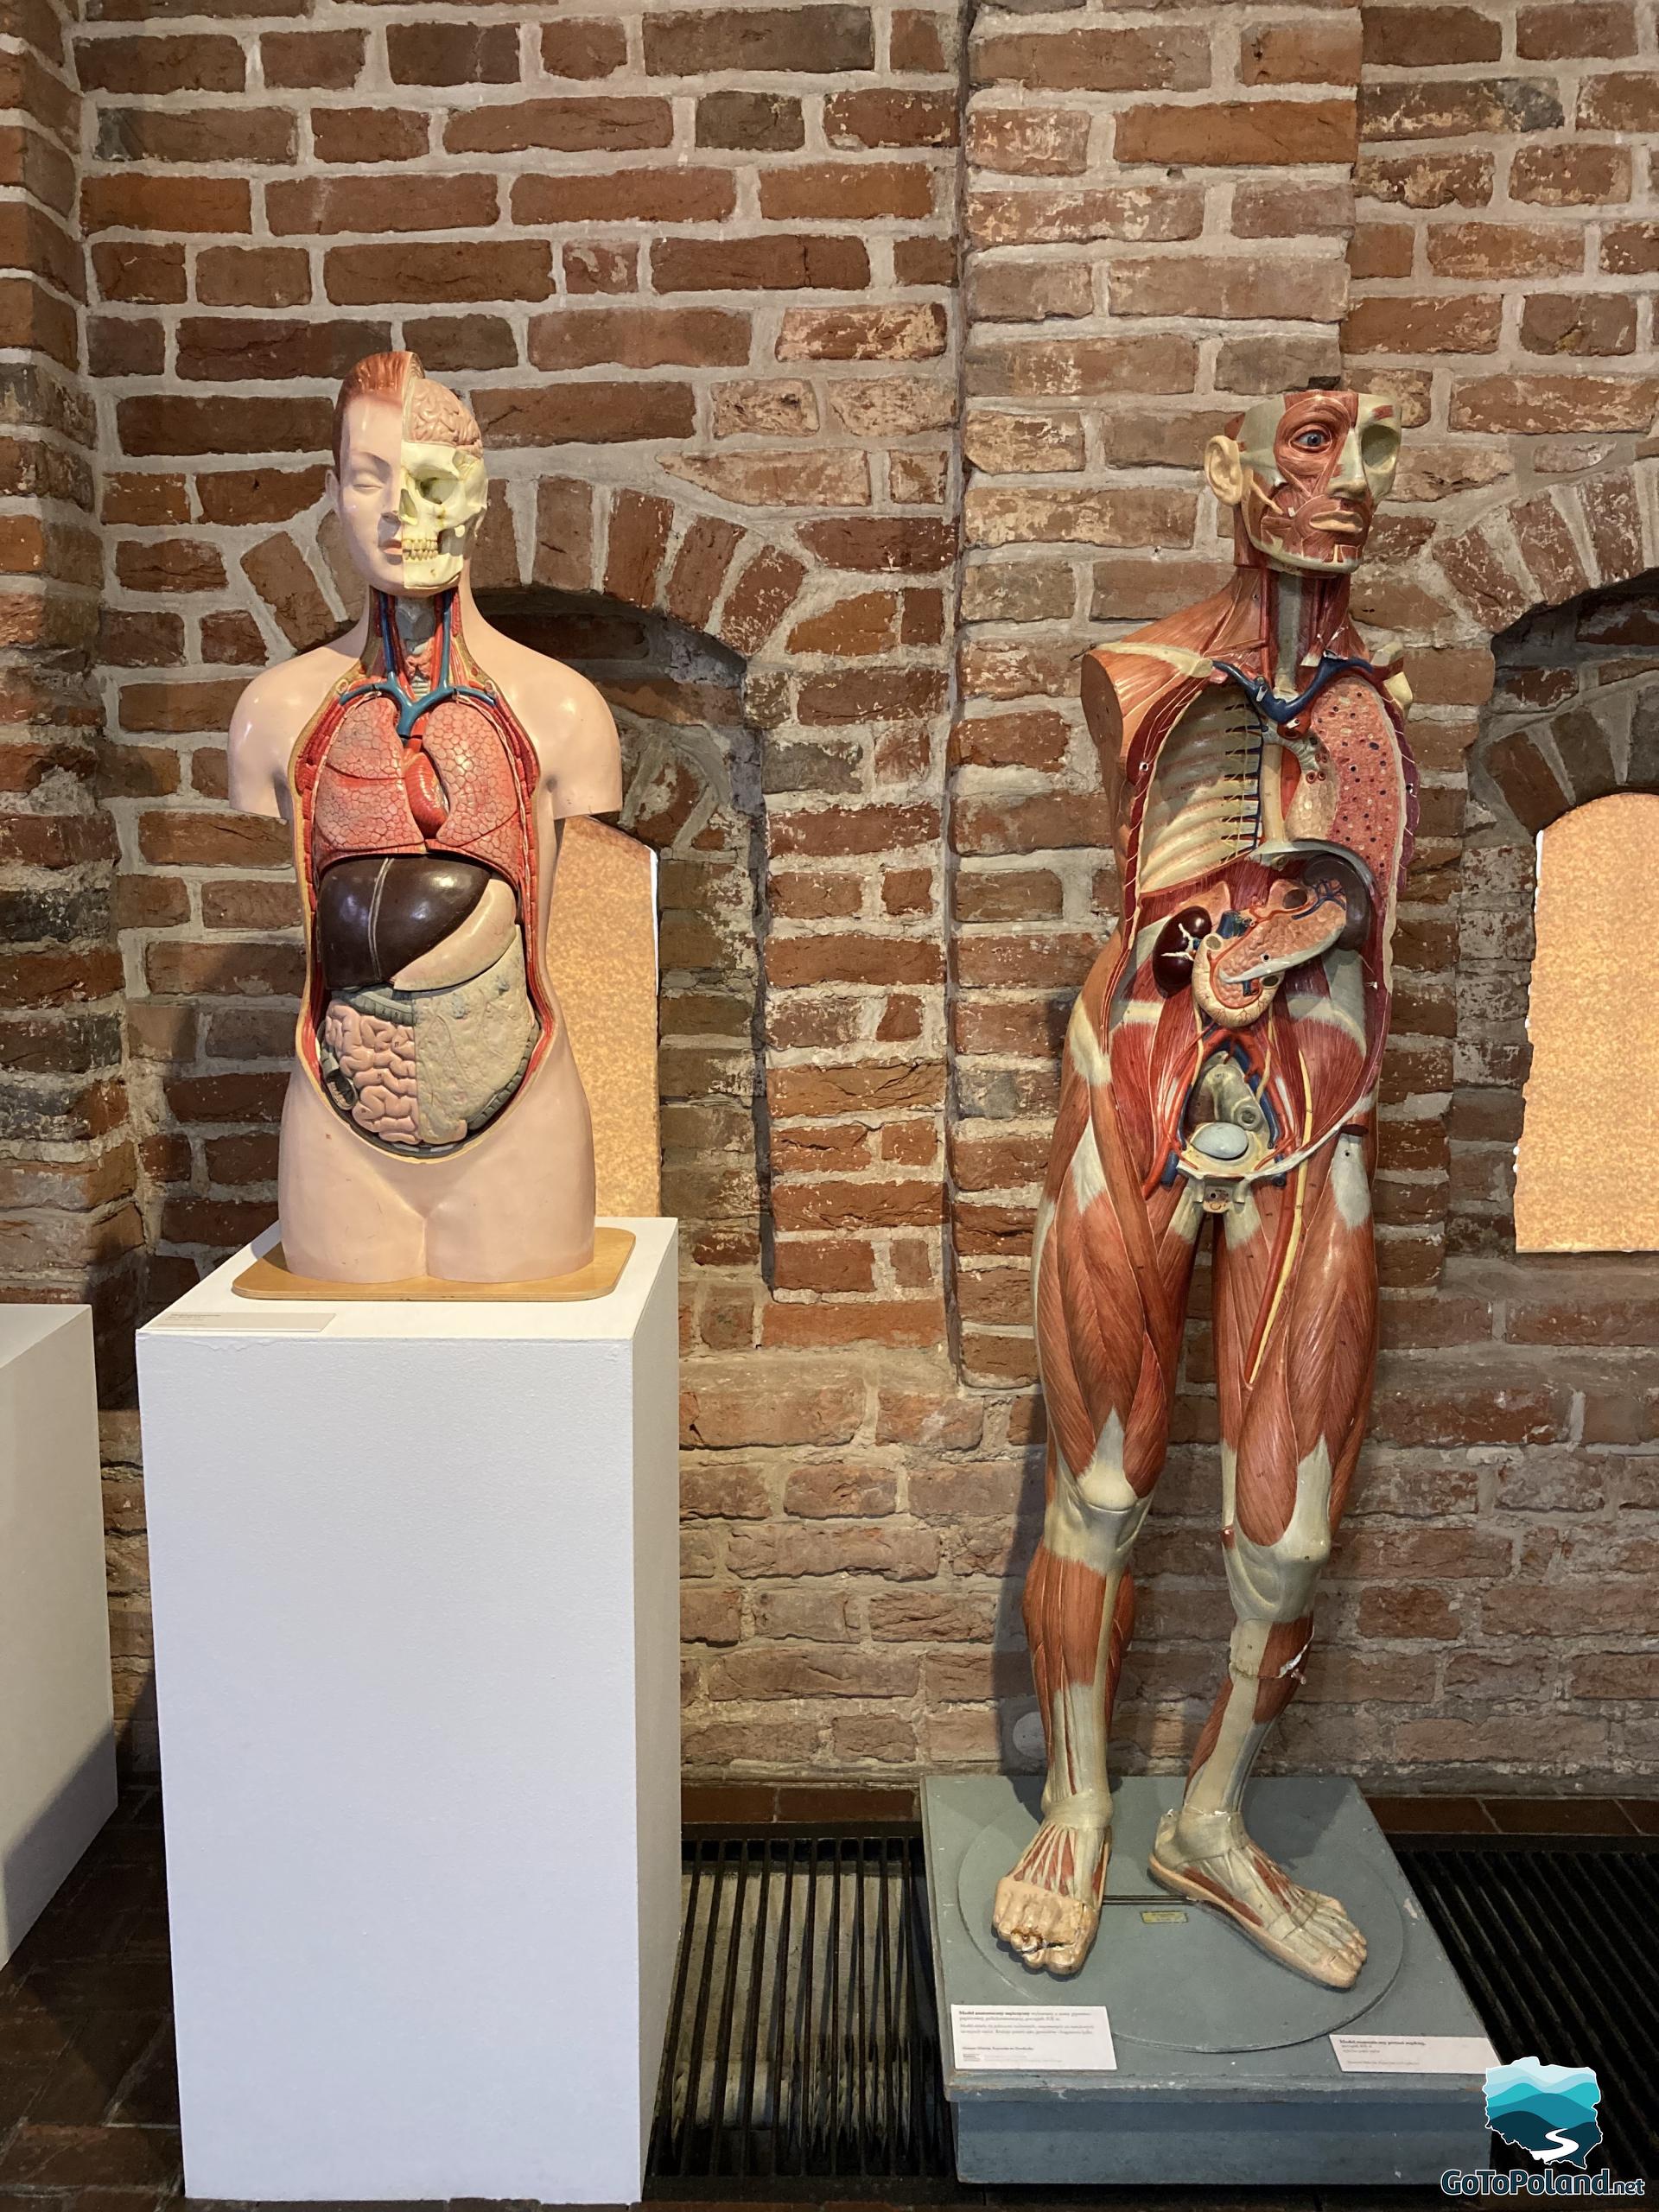 two models showing human organs